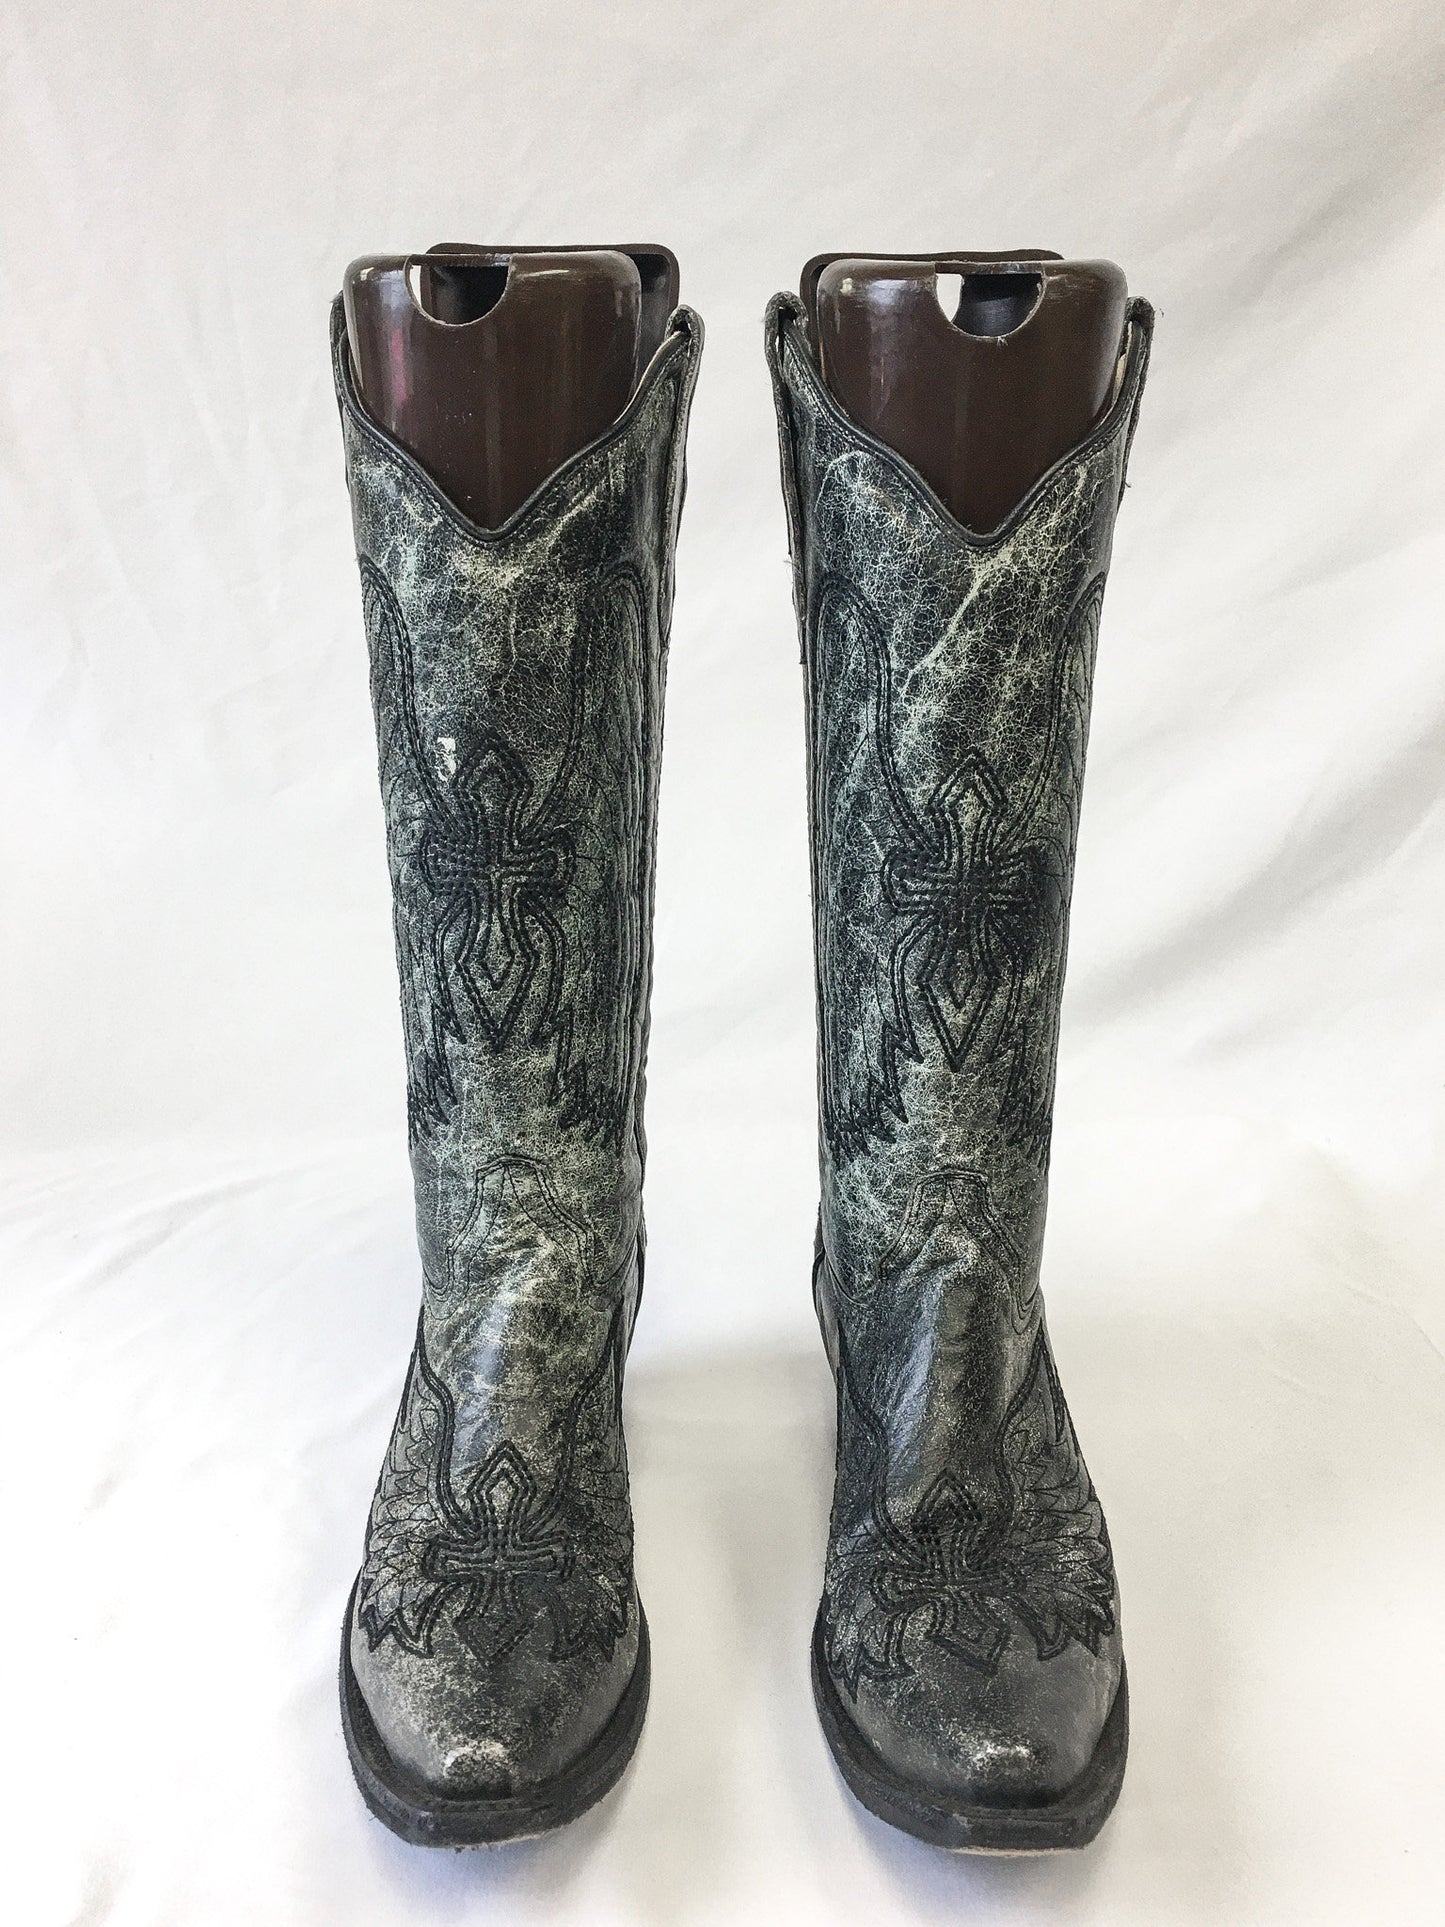 Vintage Inspired Corral Circle G Black & Gray/Green Wing and Cross Embroidered Leather Cowboy Boots, Women's Sz. 6.5M